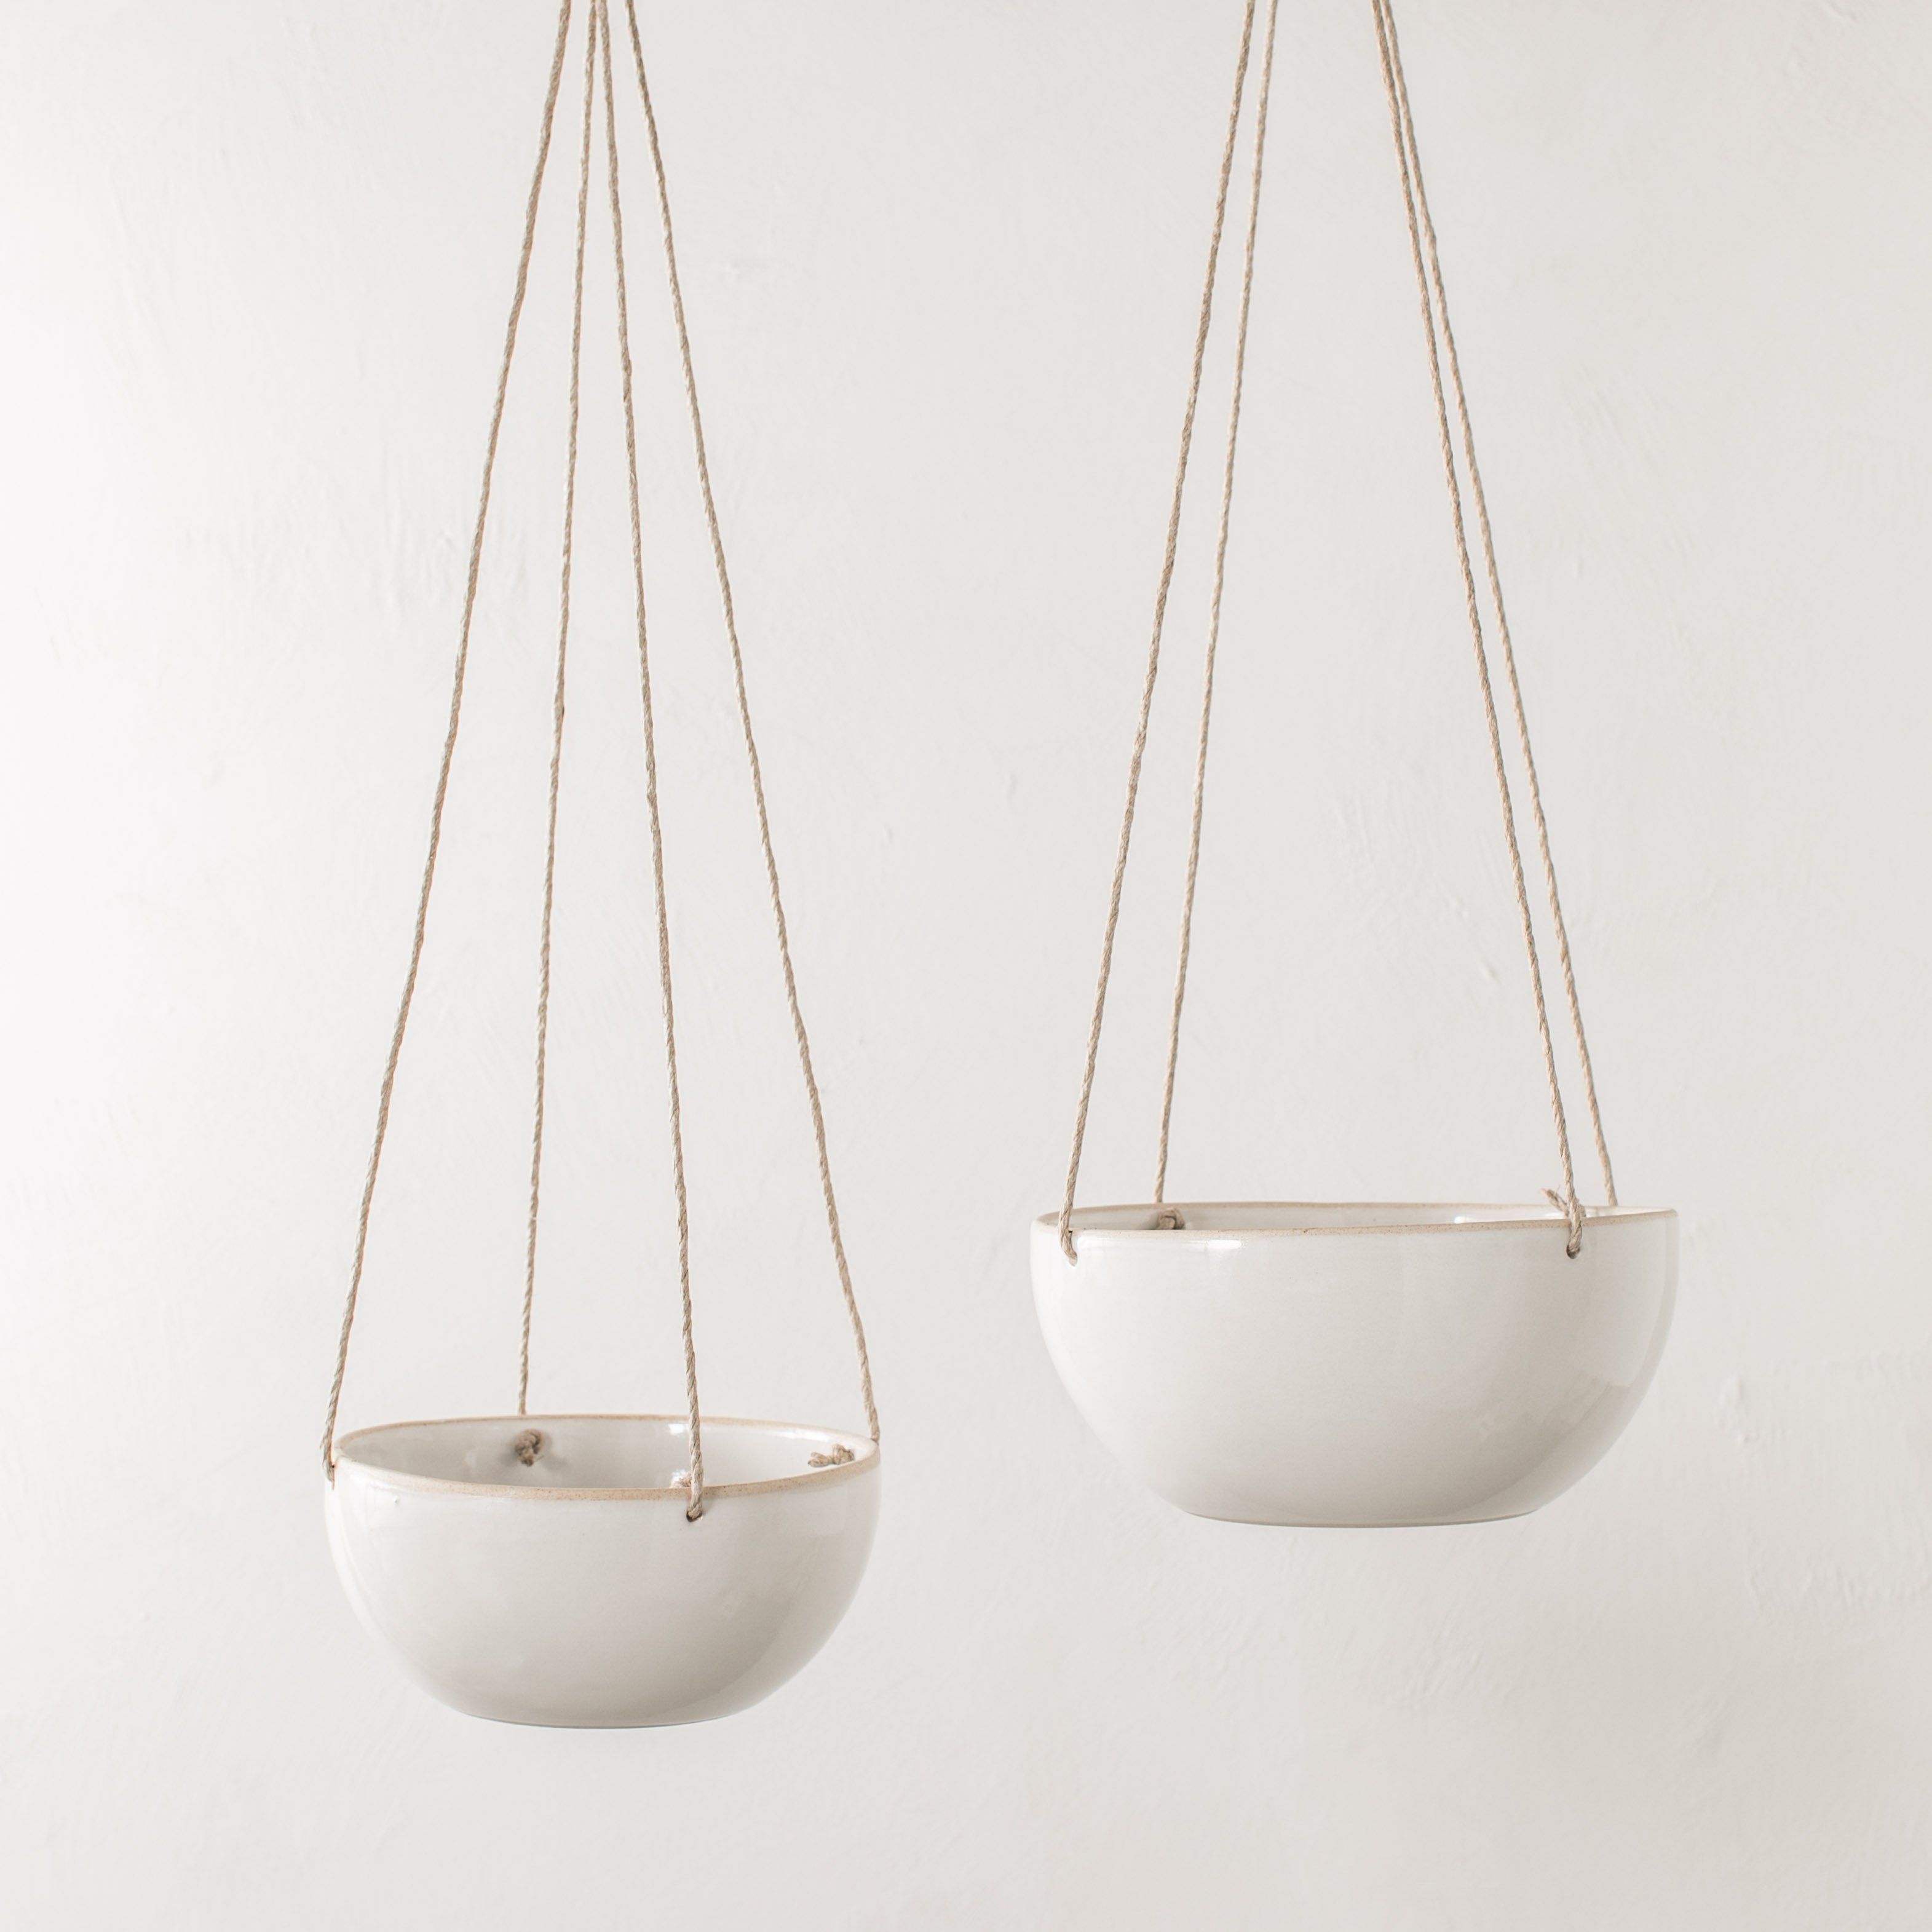 Two minimal ceramic hanging planter. Planters have an exposed stoneware rim and base. From left to right, 4 inch plater with a plant hangs by a tan hemp cord next to a hanging 6 inch planter with a plant. Handmade ceramic hanging planter, designed and sold by Convivial Production, Kansas City ceramics.